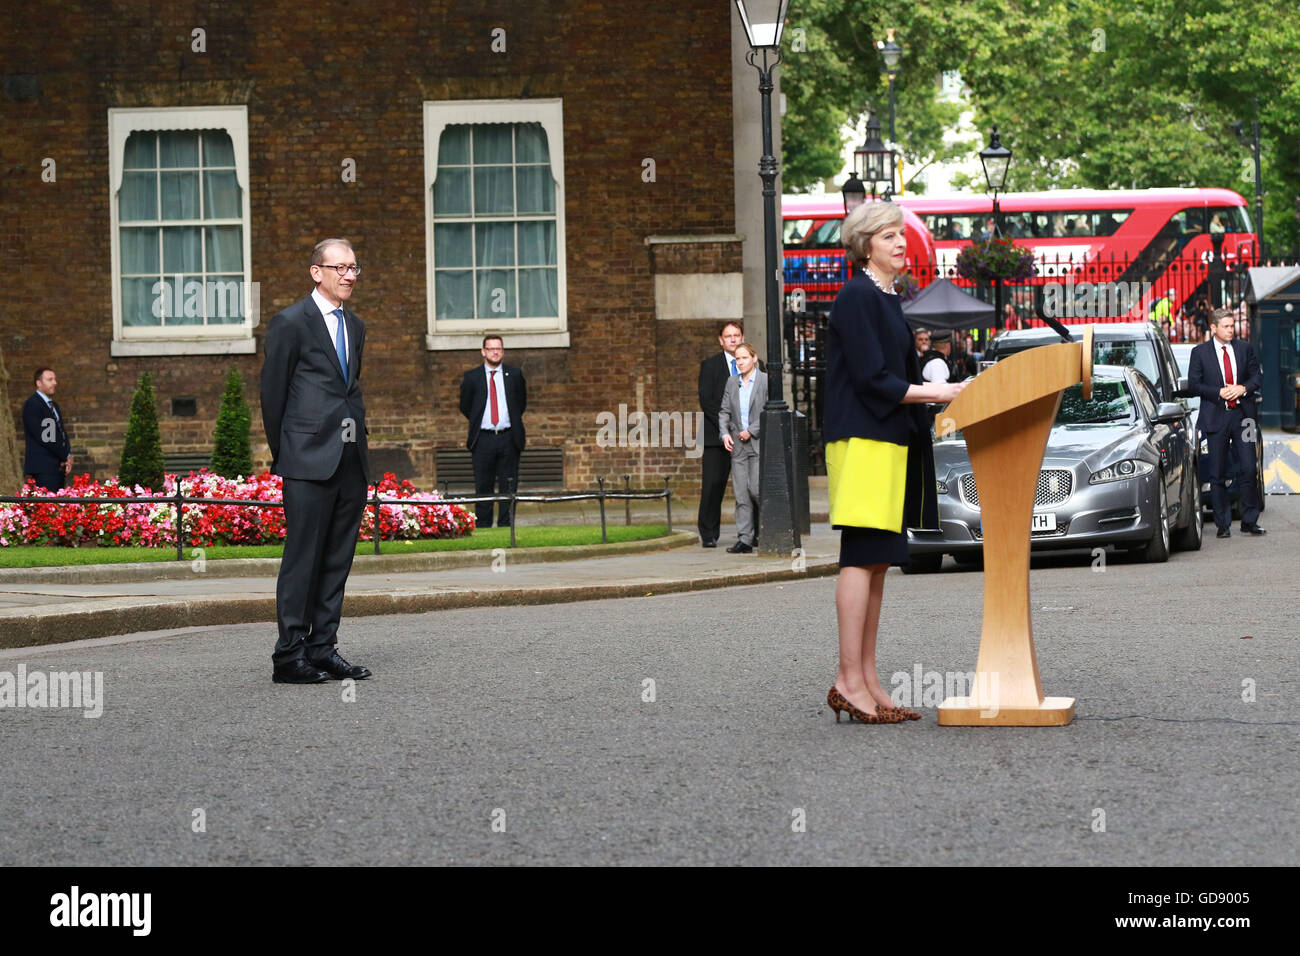 London, UK. 13th July, 2016. Philip May watches with a smile on his face as his wife, Prime Minister Theresa May, makes her arrival speech at Number 10 Downing Street. Theresa May has officially become the new Prime Minister after meeting with HM Queen Elizabeth II at Buckingham Palace. Theresa May becomes the second woman Prime Minister in Great Britain, Margaret Thatcher was the first. David Cameron left Number 10 Downing Street with wife Samantha and their children, a short while earlier.  Credit:  Paul Marriott/Alamy Live News Stock Photo